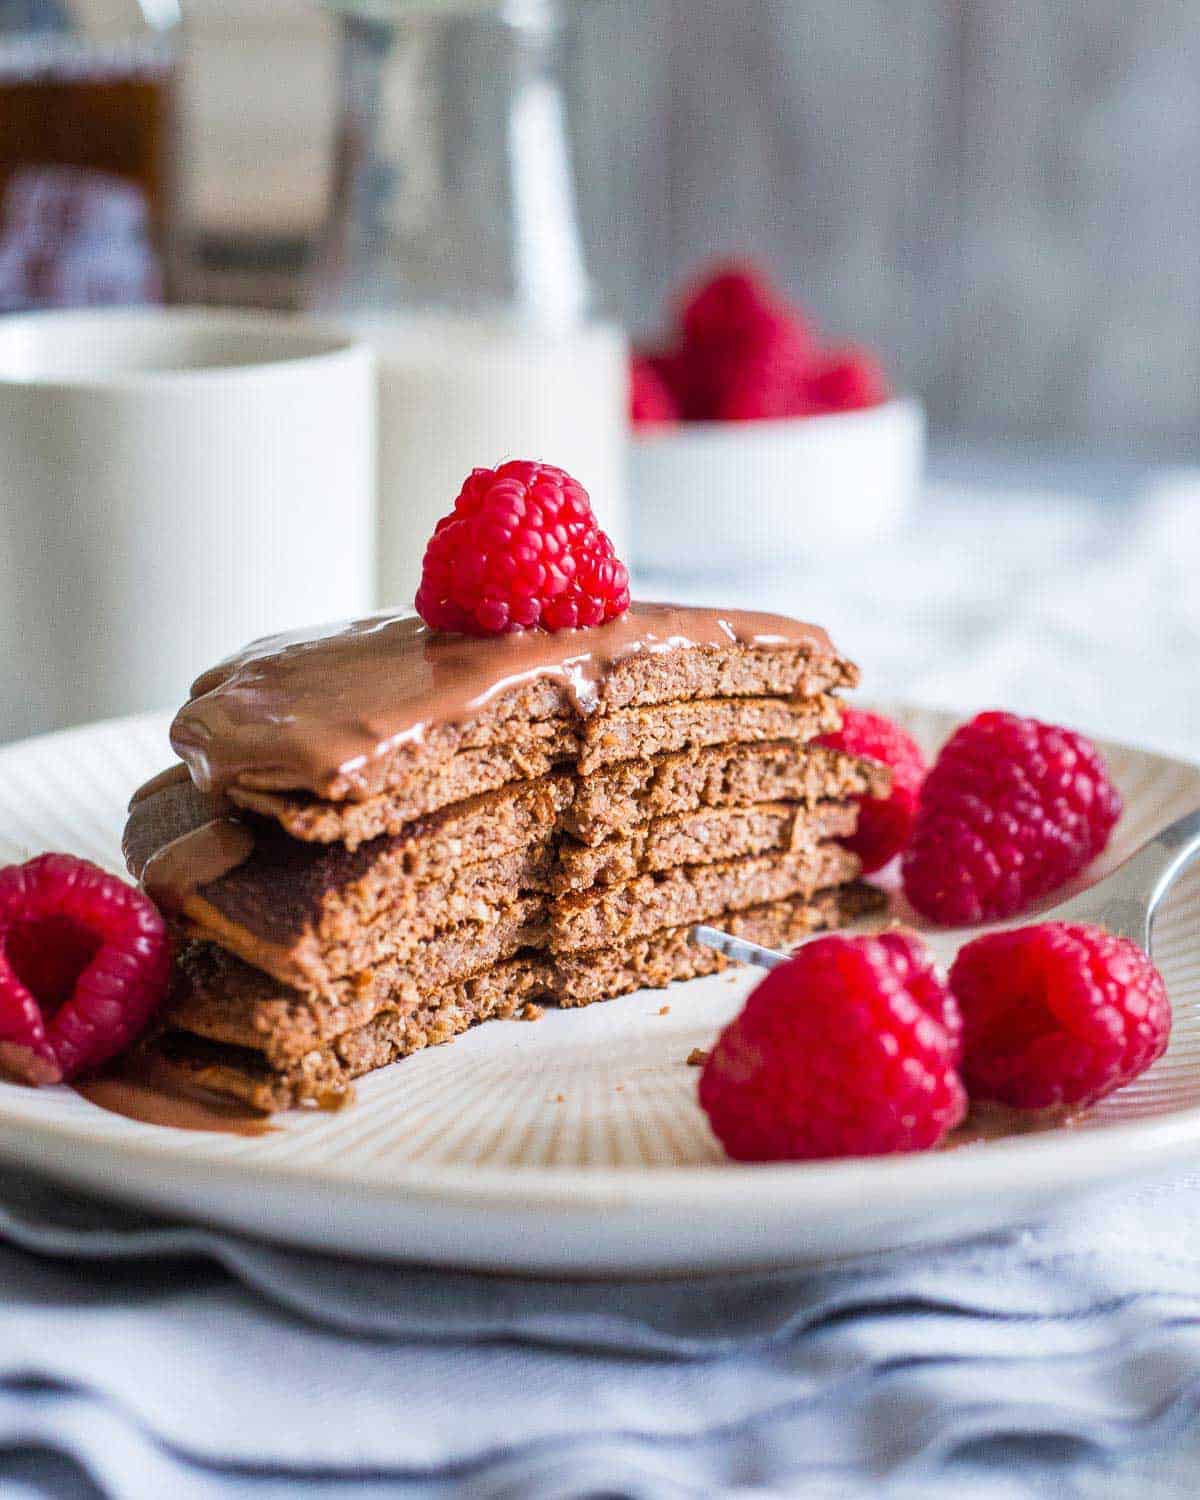 Full of chocolate flavor and with a delicious chocolate sauce on top, these protein pancakes taste more like dessert than a healthy breakfast!